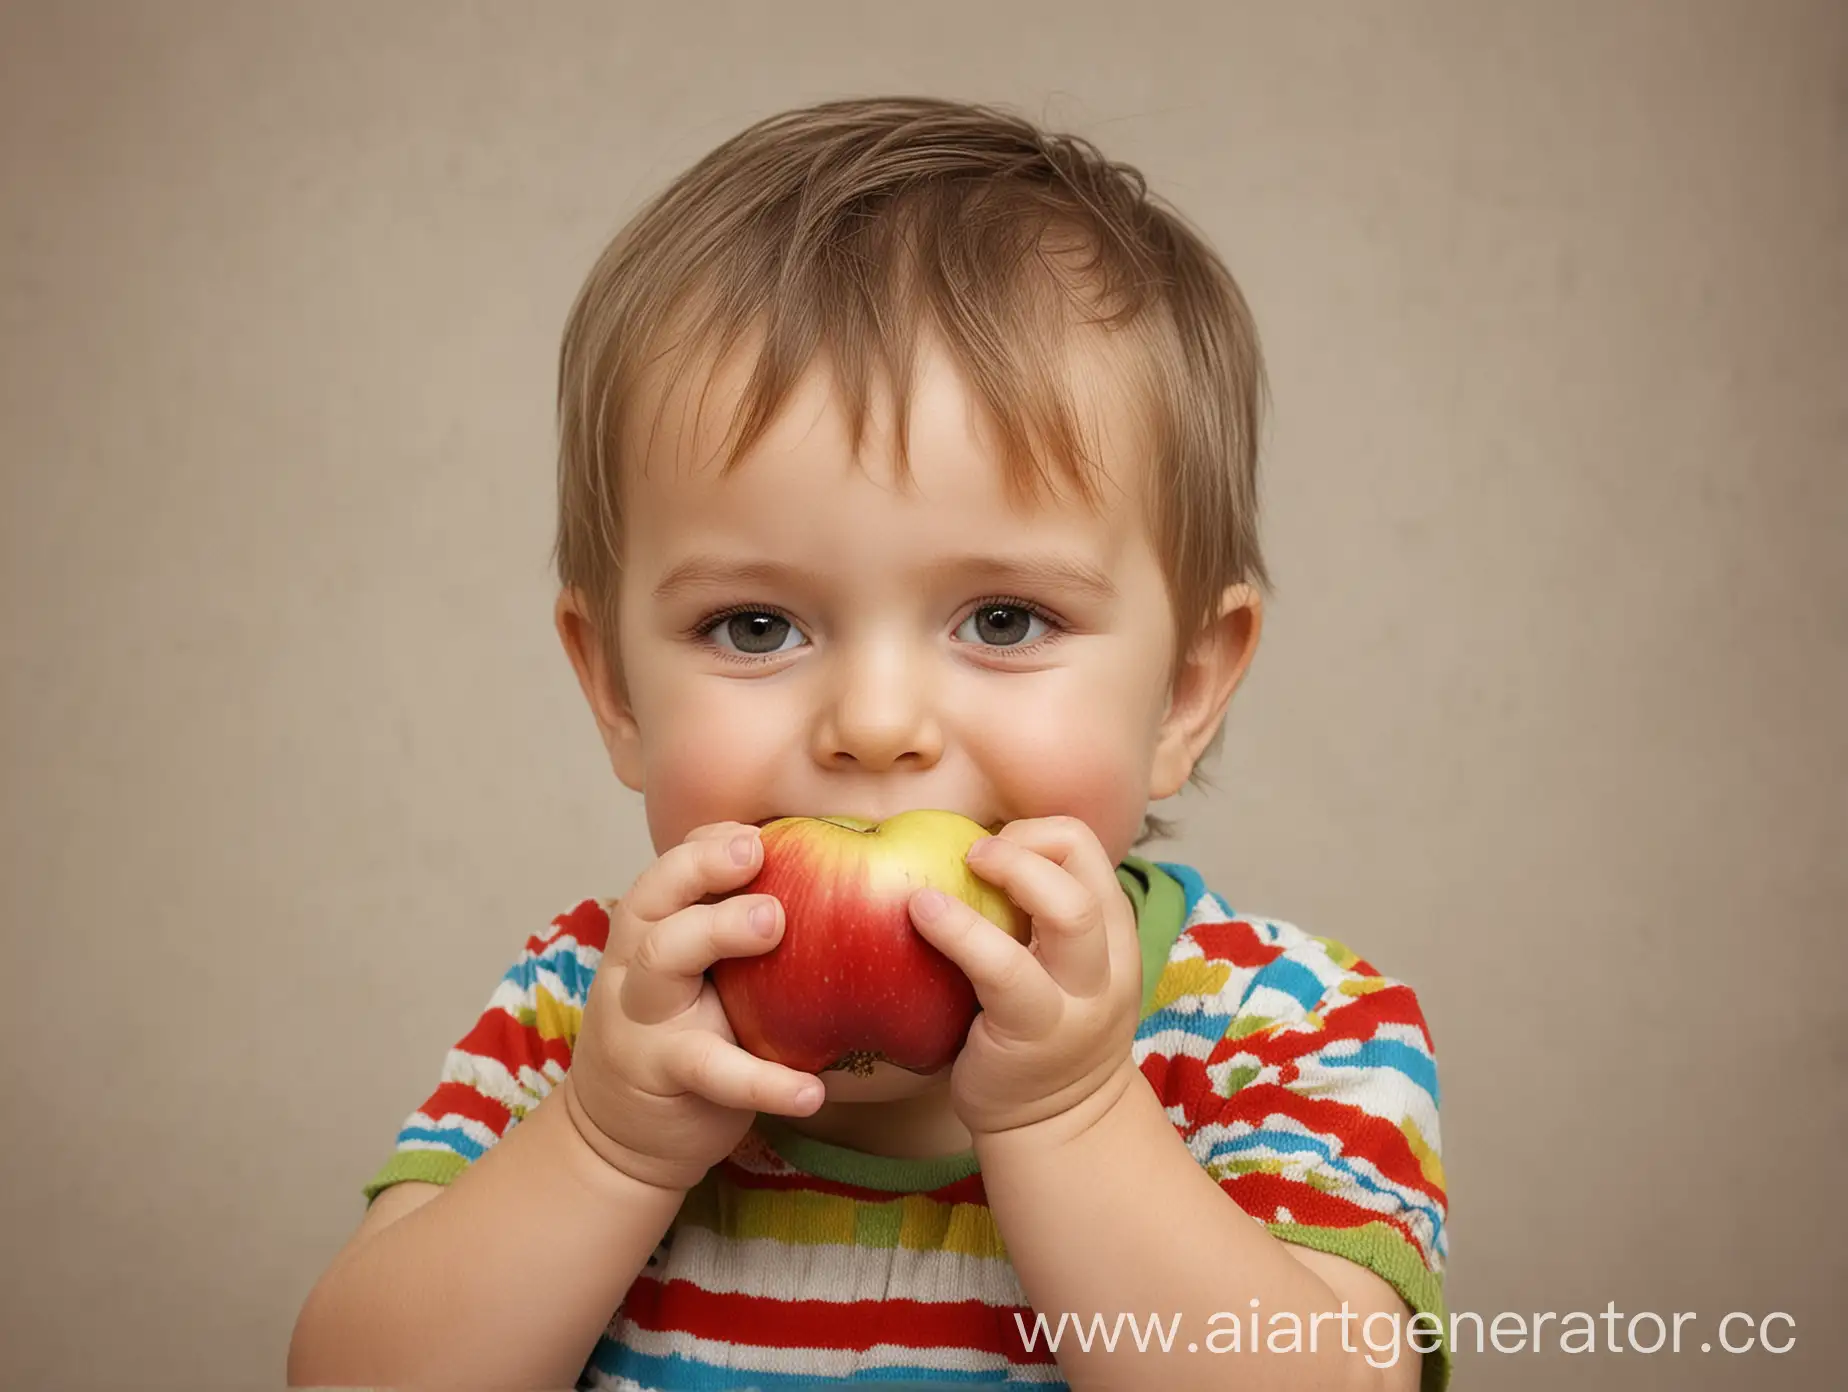 Young-Child-Eating-Apple-in-Horizontal-Composition